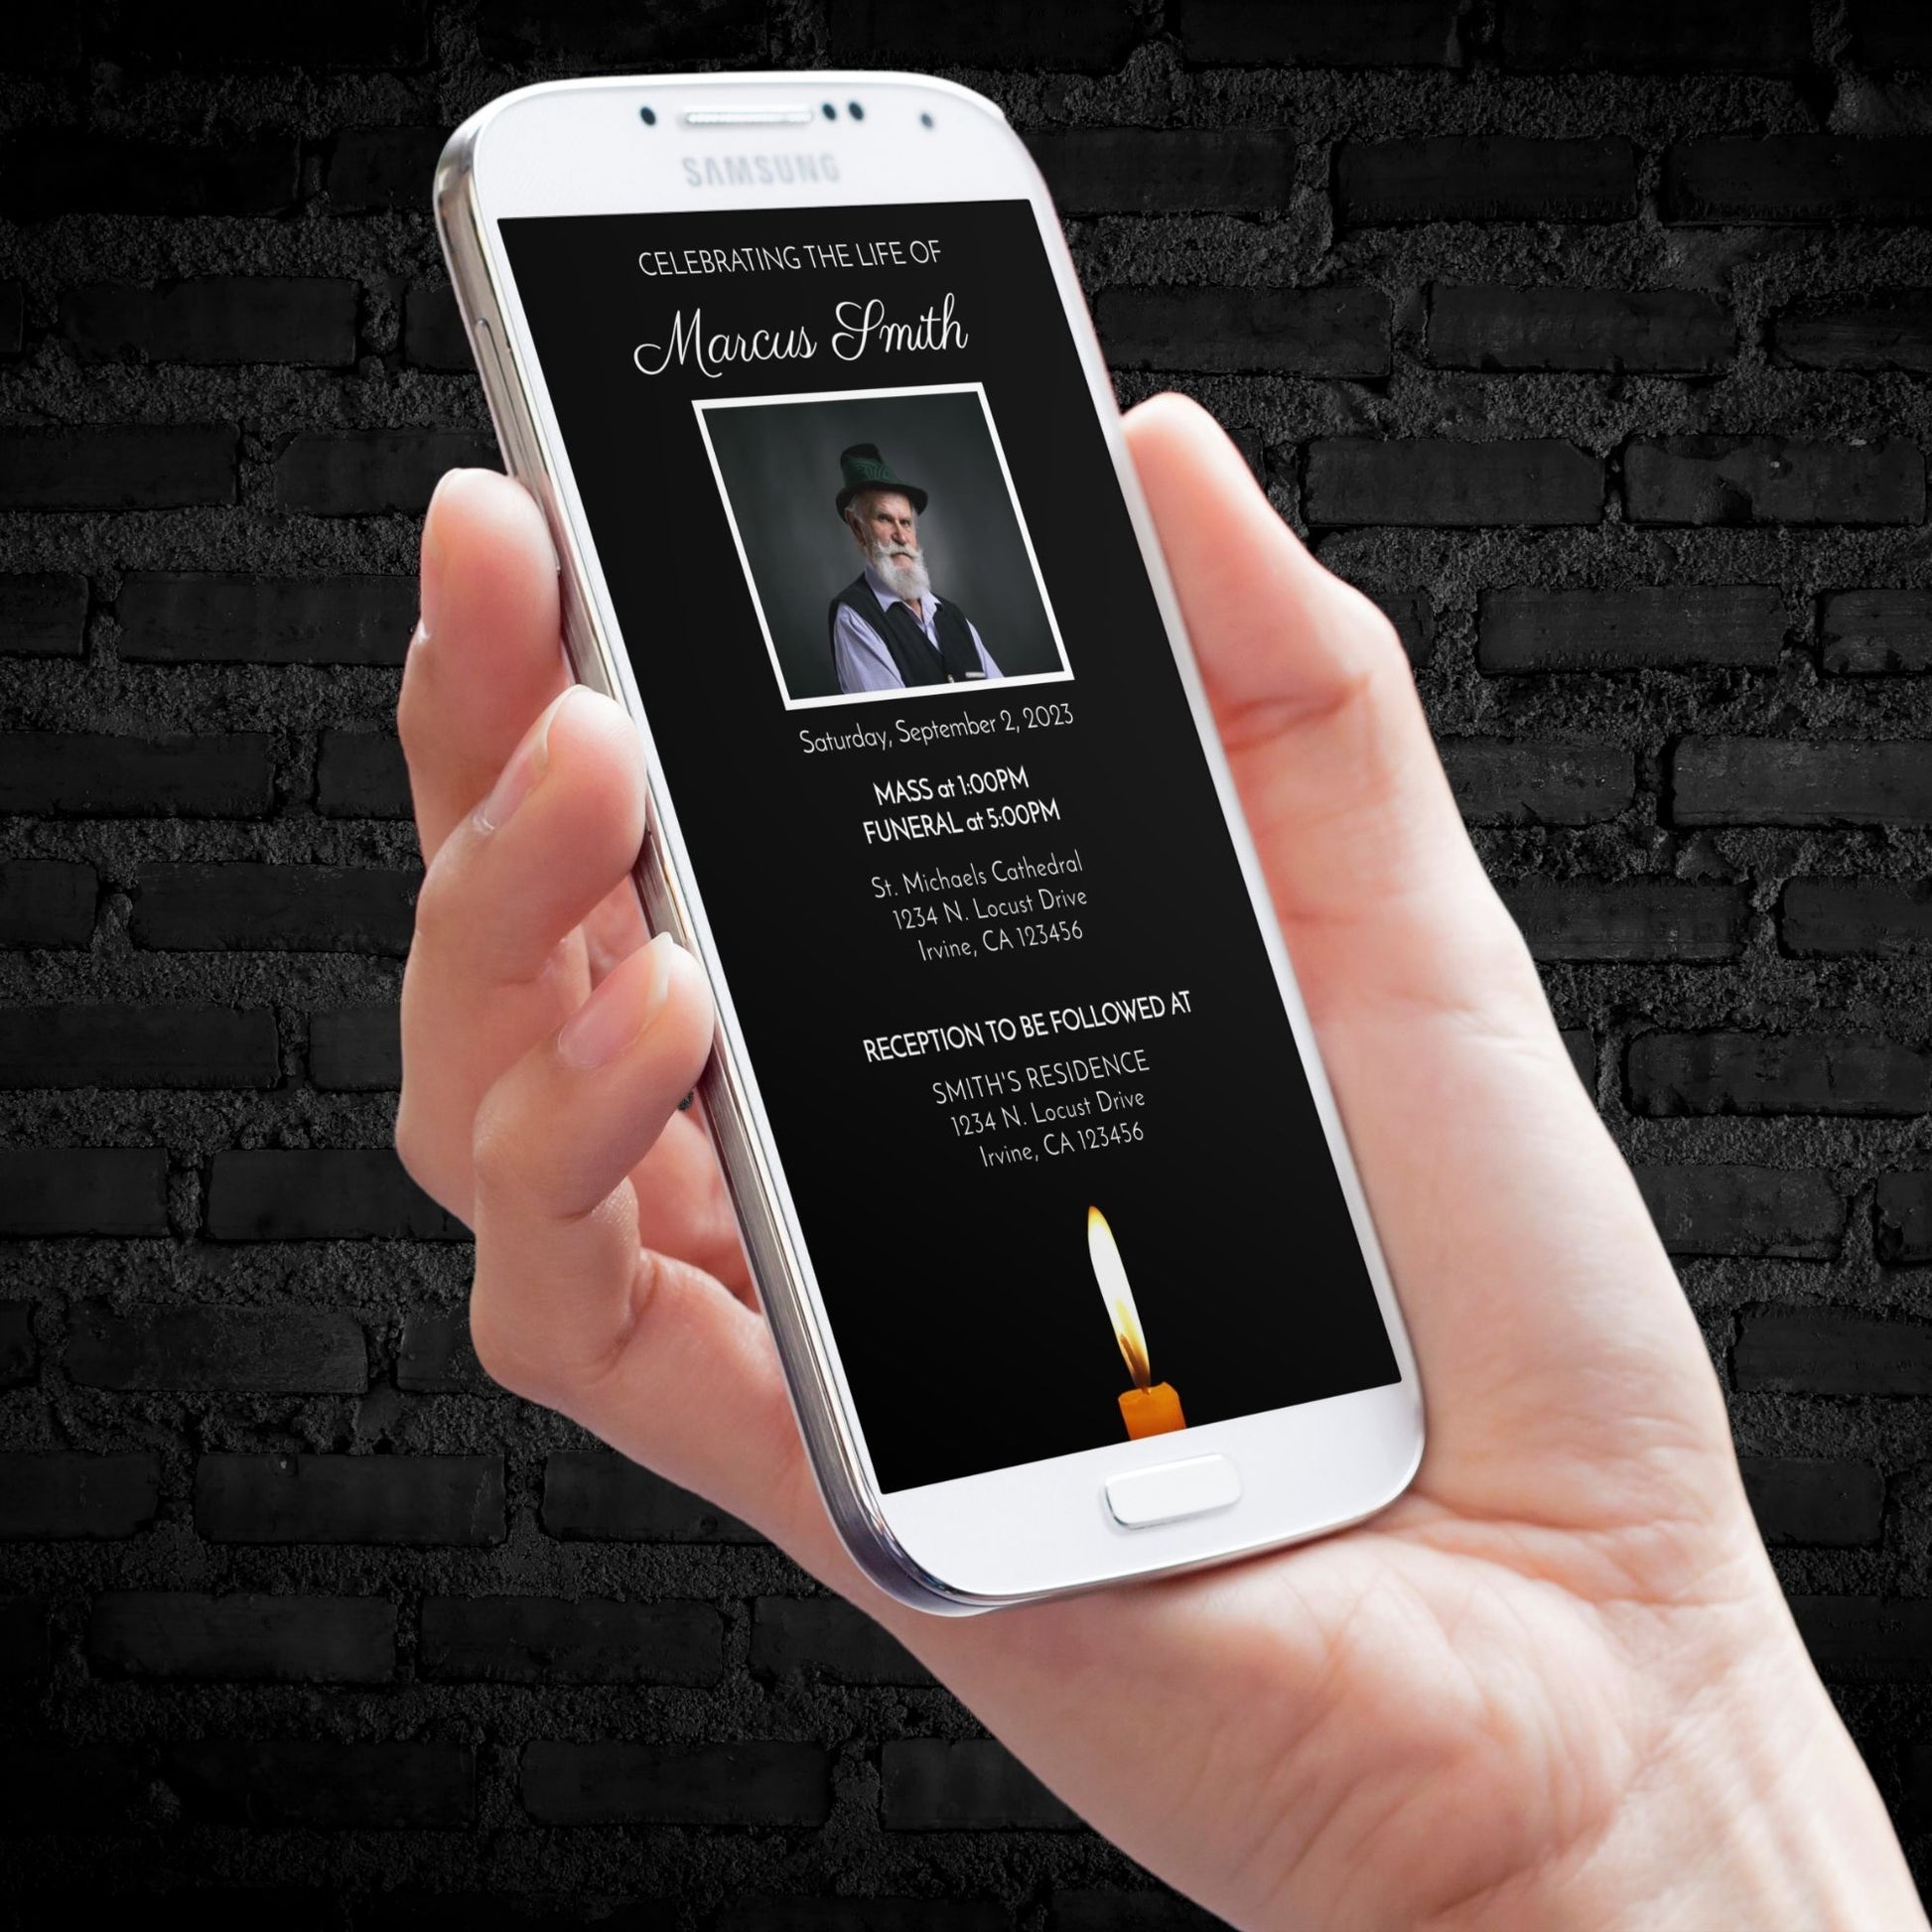 Funeral Service Electronic Smartphone Invitation Template